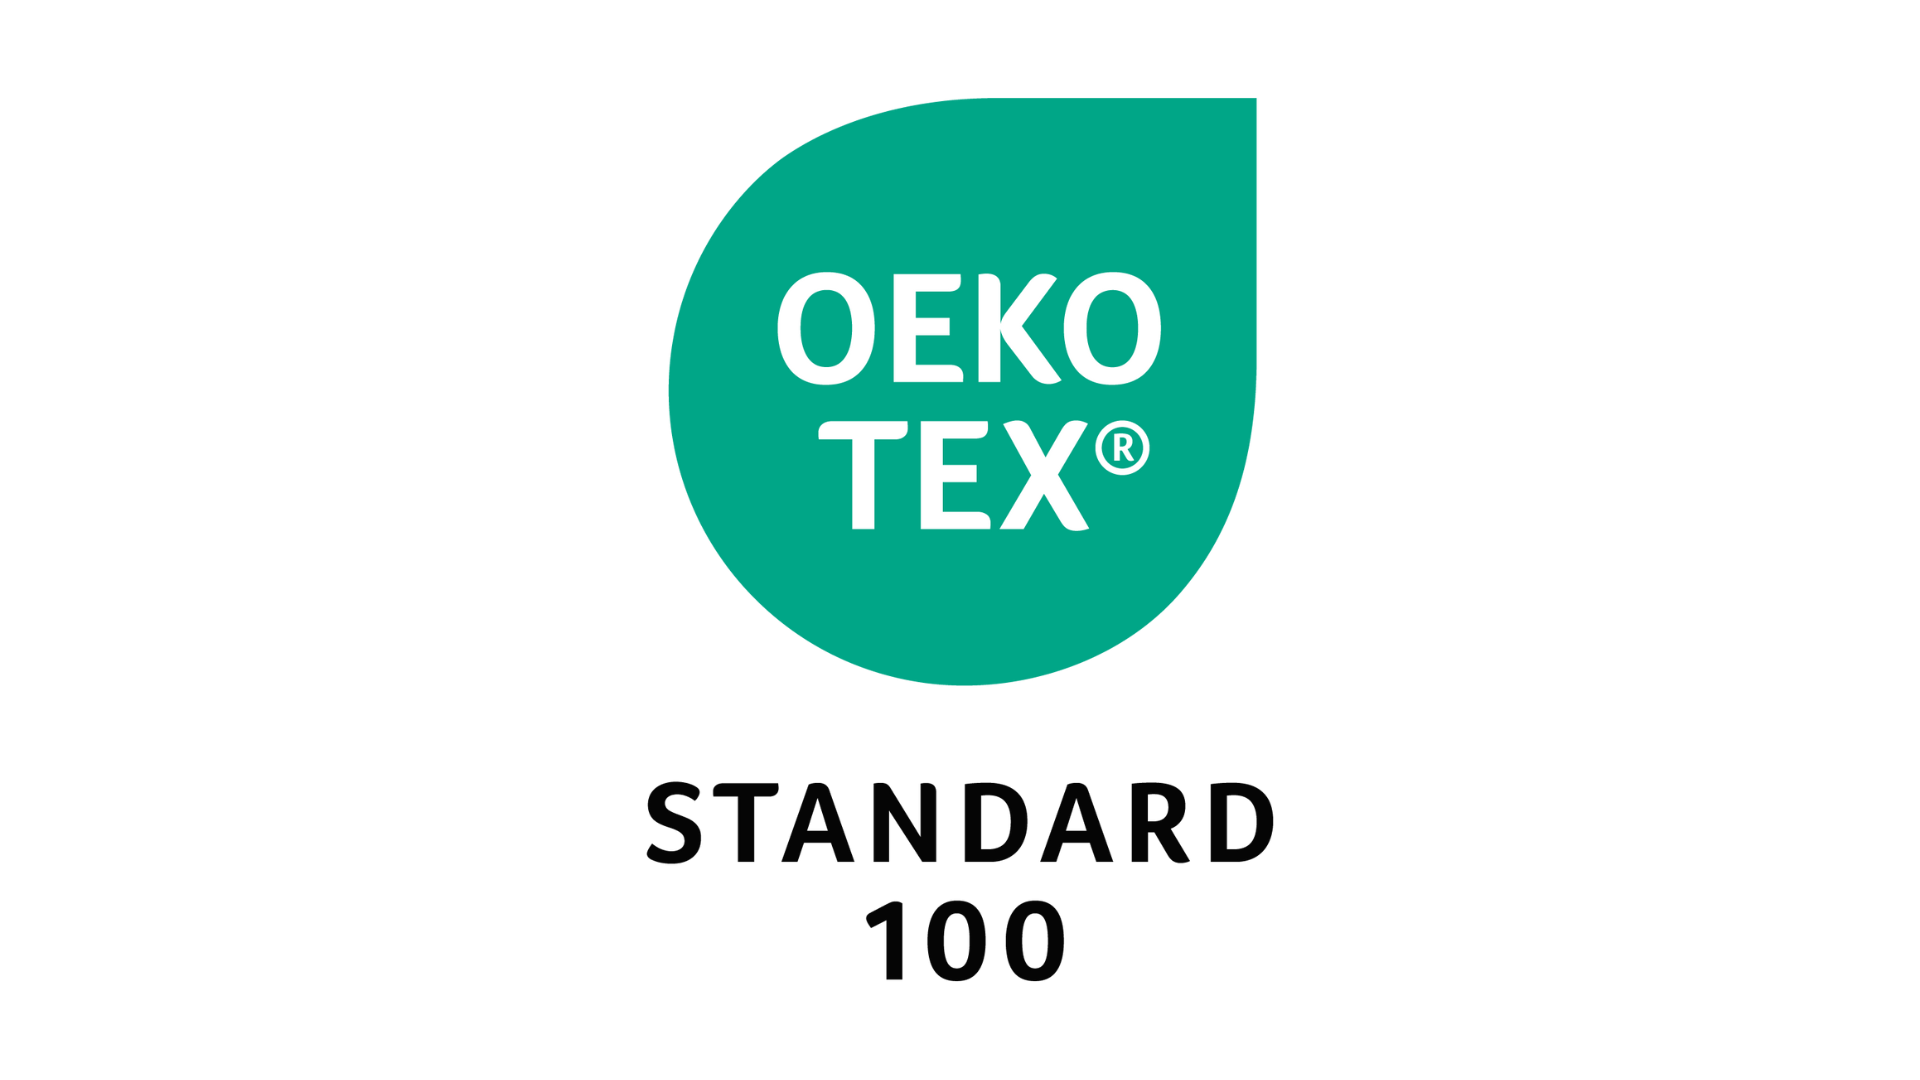 Certified Safe - The Joyce comfort range has been independently certified as free of harmful substances according to the strict global criteria of STANDARD 100 by OEKO-TEX®.STANDARD 100 certifies that products are:  Free of harmful chemical substancesSafe for direct contact with the skin